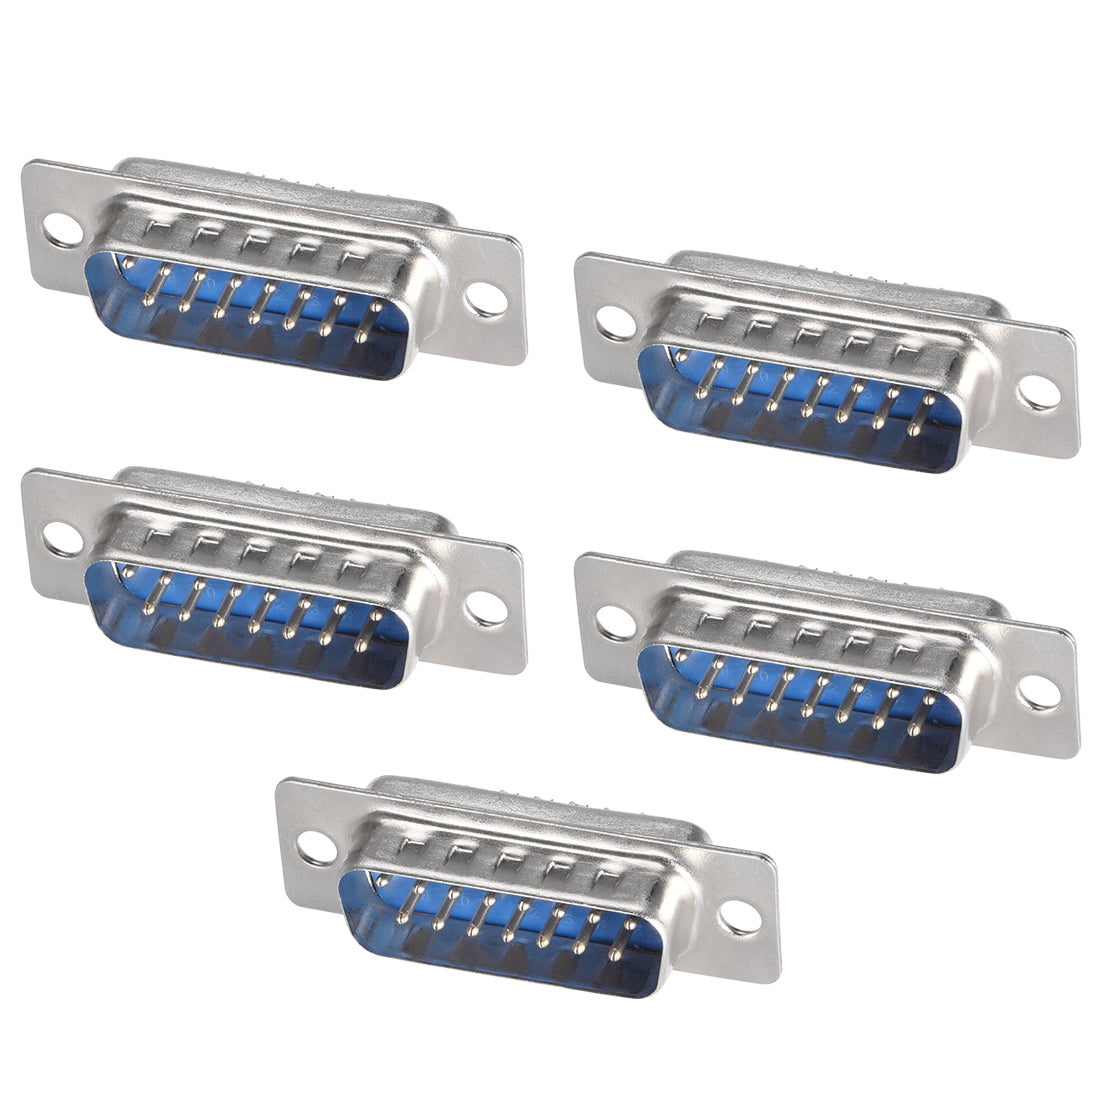 uxcell Uxcell D-sub Connector Male Plug 15-pin 2-row Port Terminal Breakout Solder Type for Mechanical Equipment CNC Computers Blue 5pcs